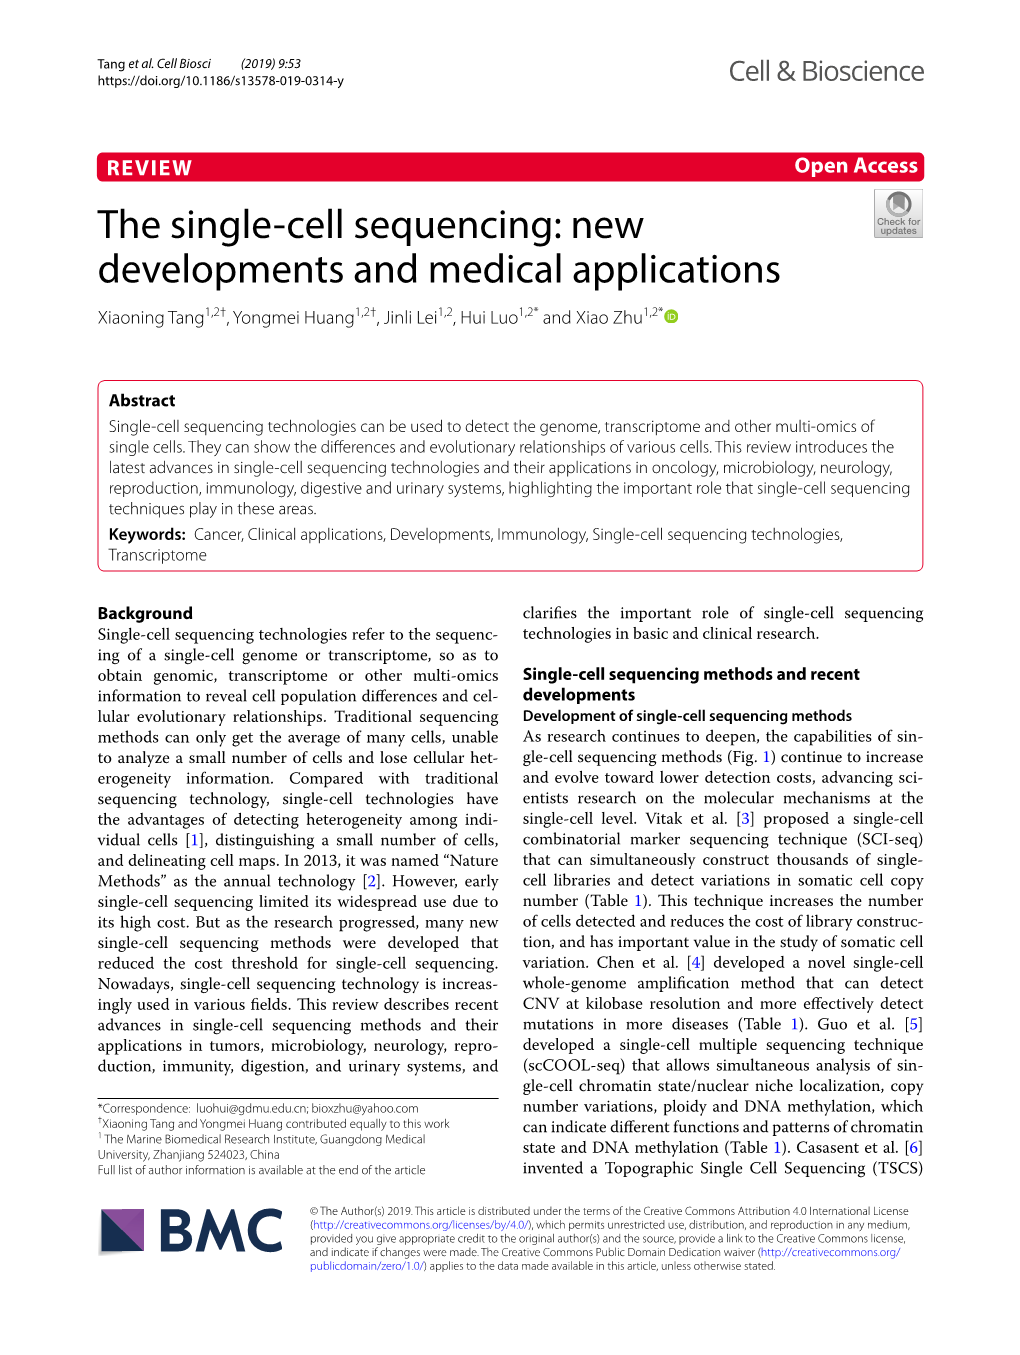 The Single-Cell Sequencing: New Developments and Medical